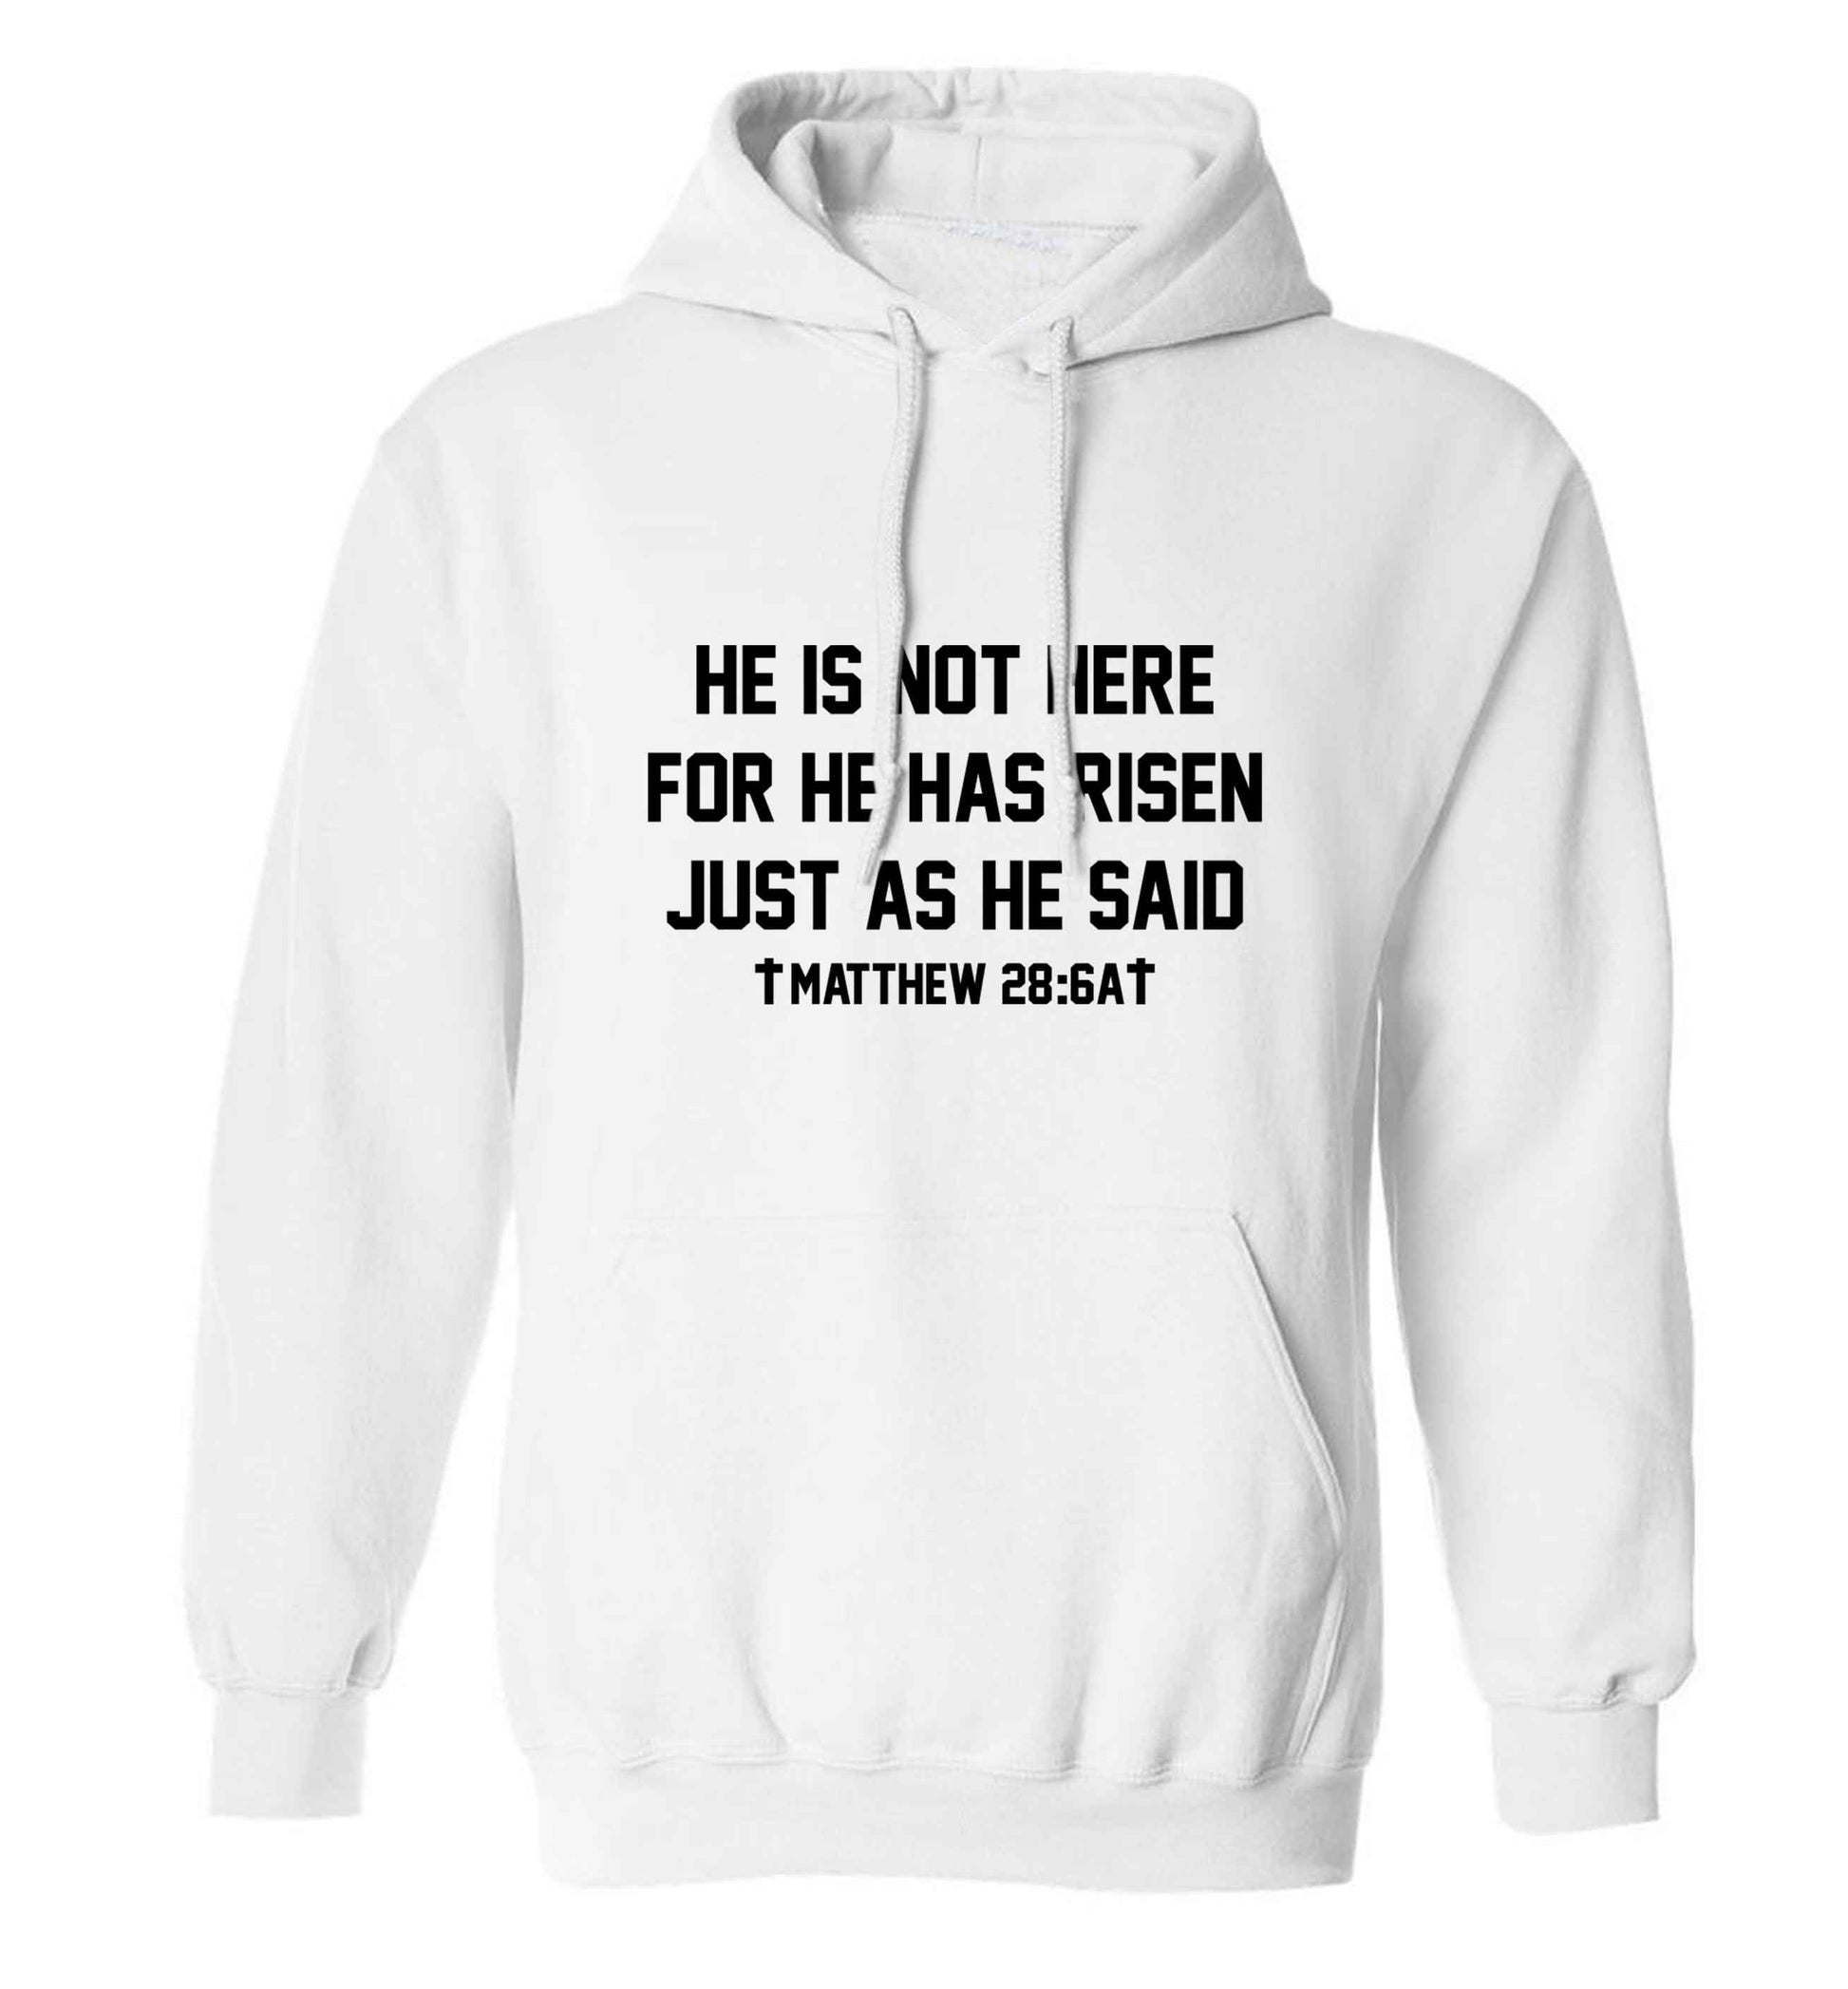 He is not here for he has risen just as he said matthew 28:6A adults unisex white hoodie 2XL